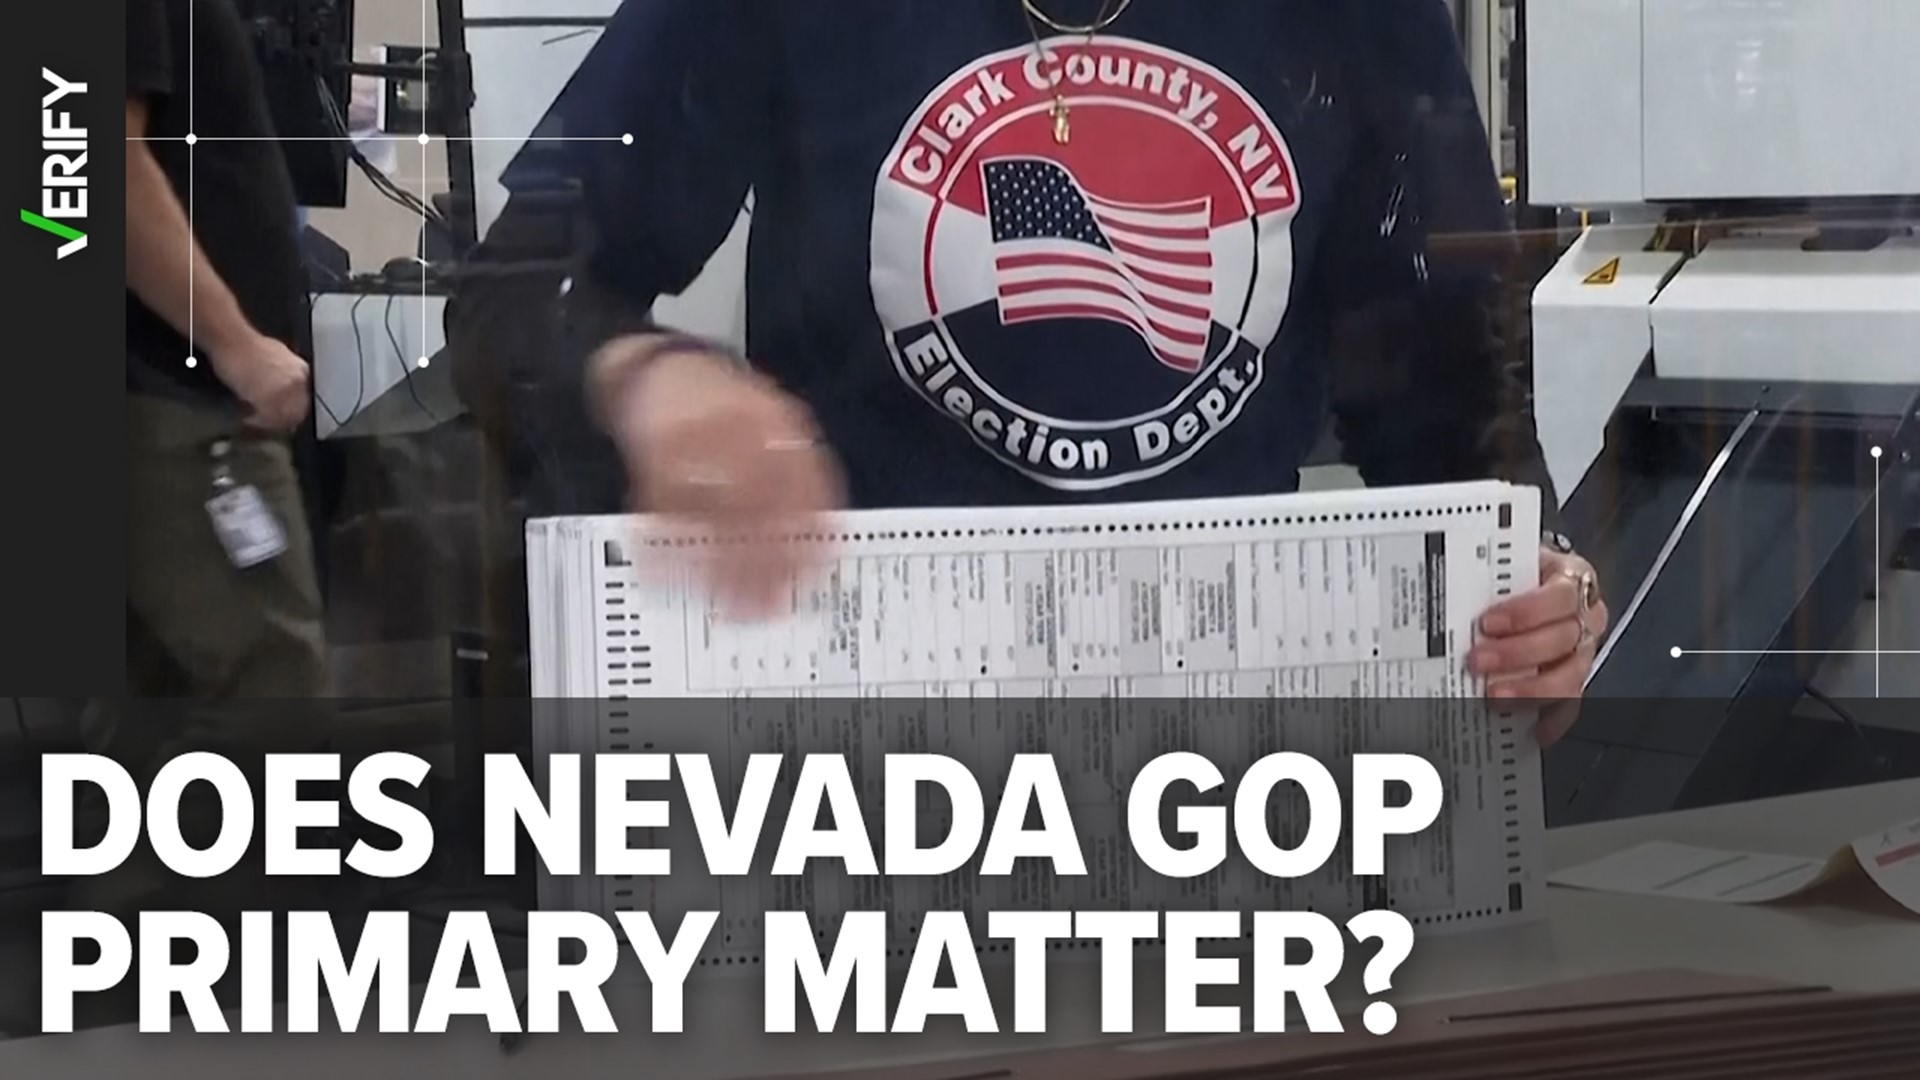 Nevada is holding both a Republican primary and a caucus. But only the caucus, which former President Trump is registered as a candidate for, actually counts.